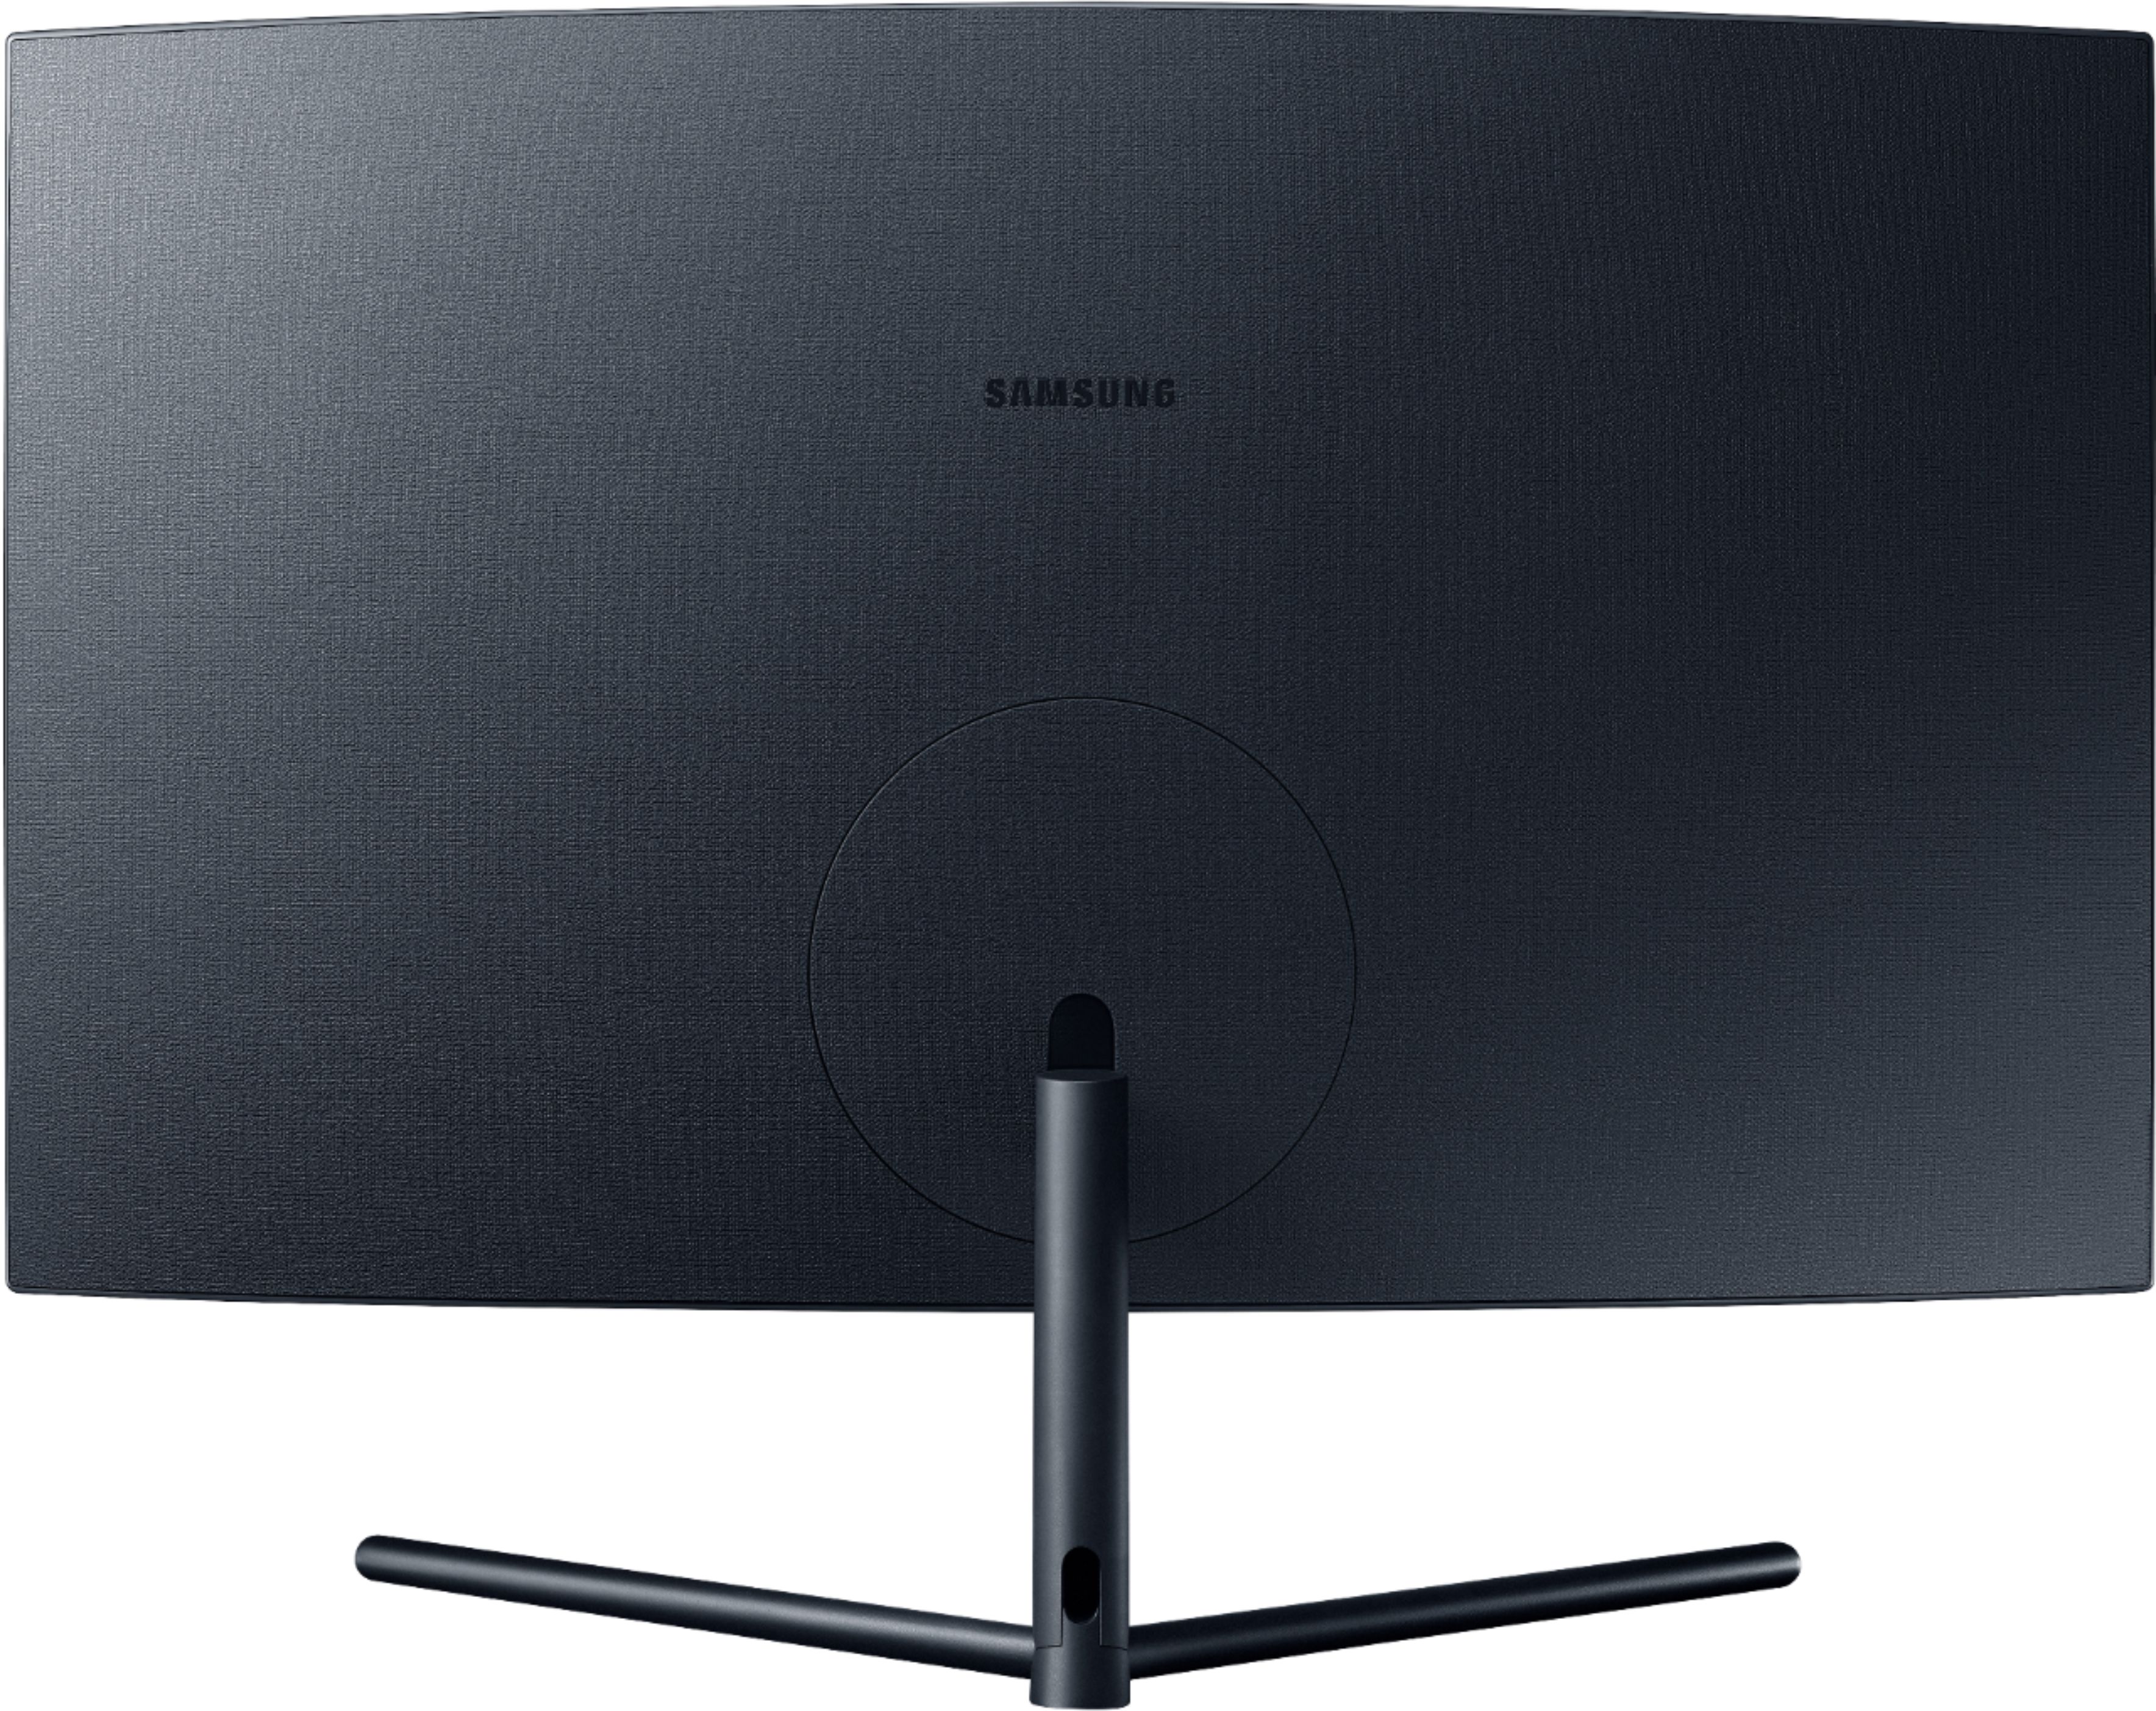 Back View: Samsung - S60A Series 24" QHD Monitor with HDR (HDMI, USB) - Black